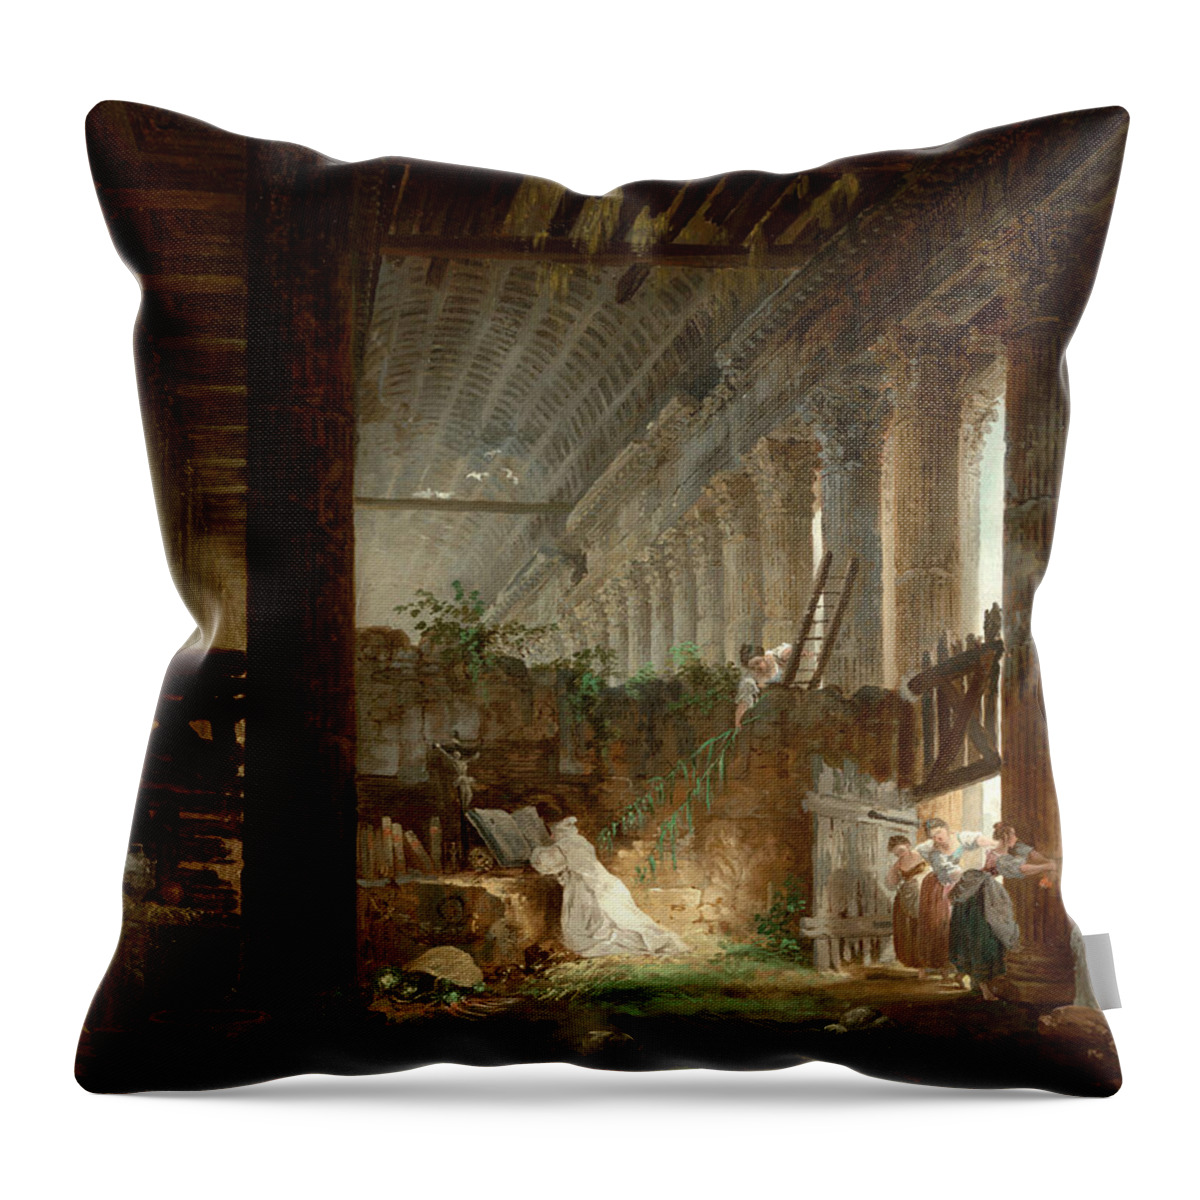 Hubert Robert Throw Pillow featuring the painting A Hermit Praying in the Ruins of a Roman Temple by Hubert Robert